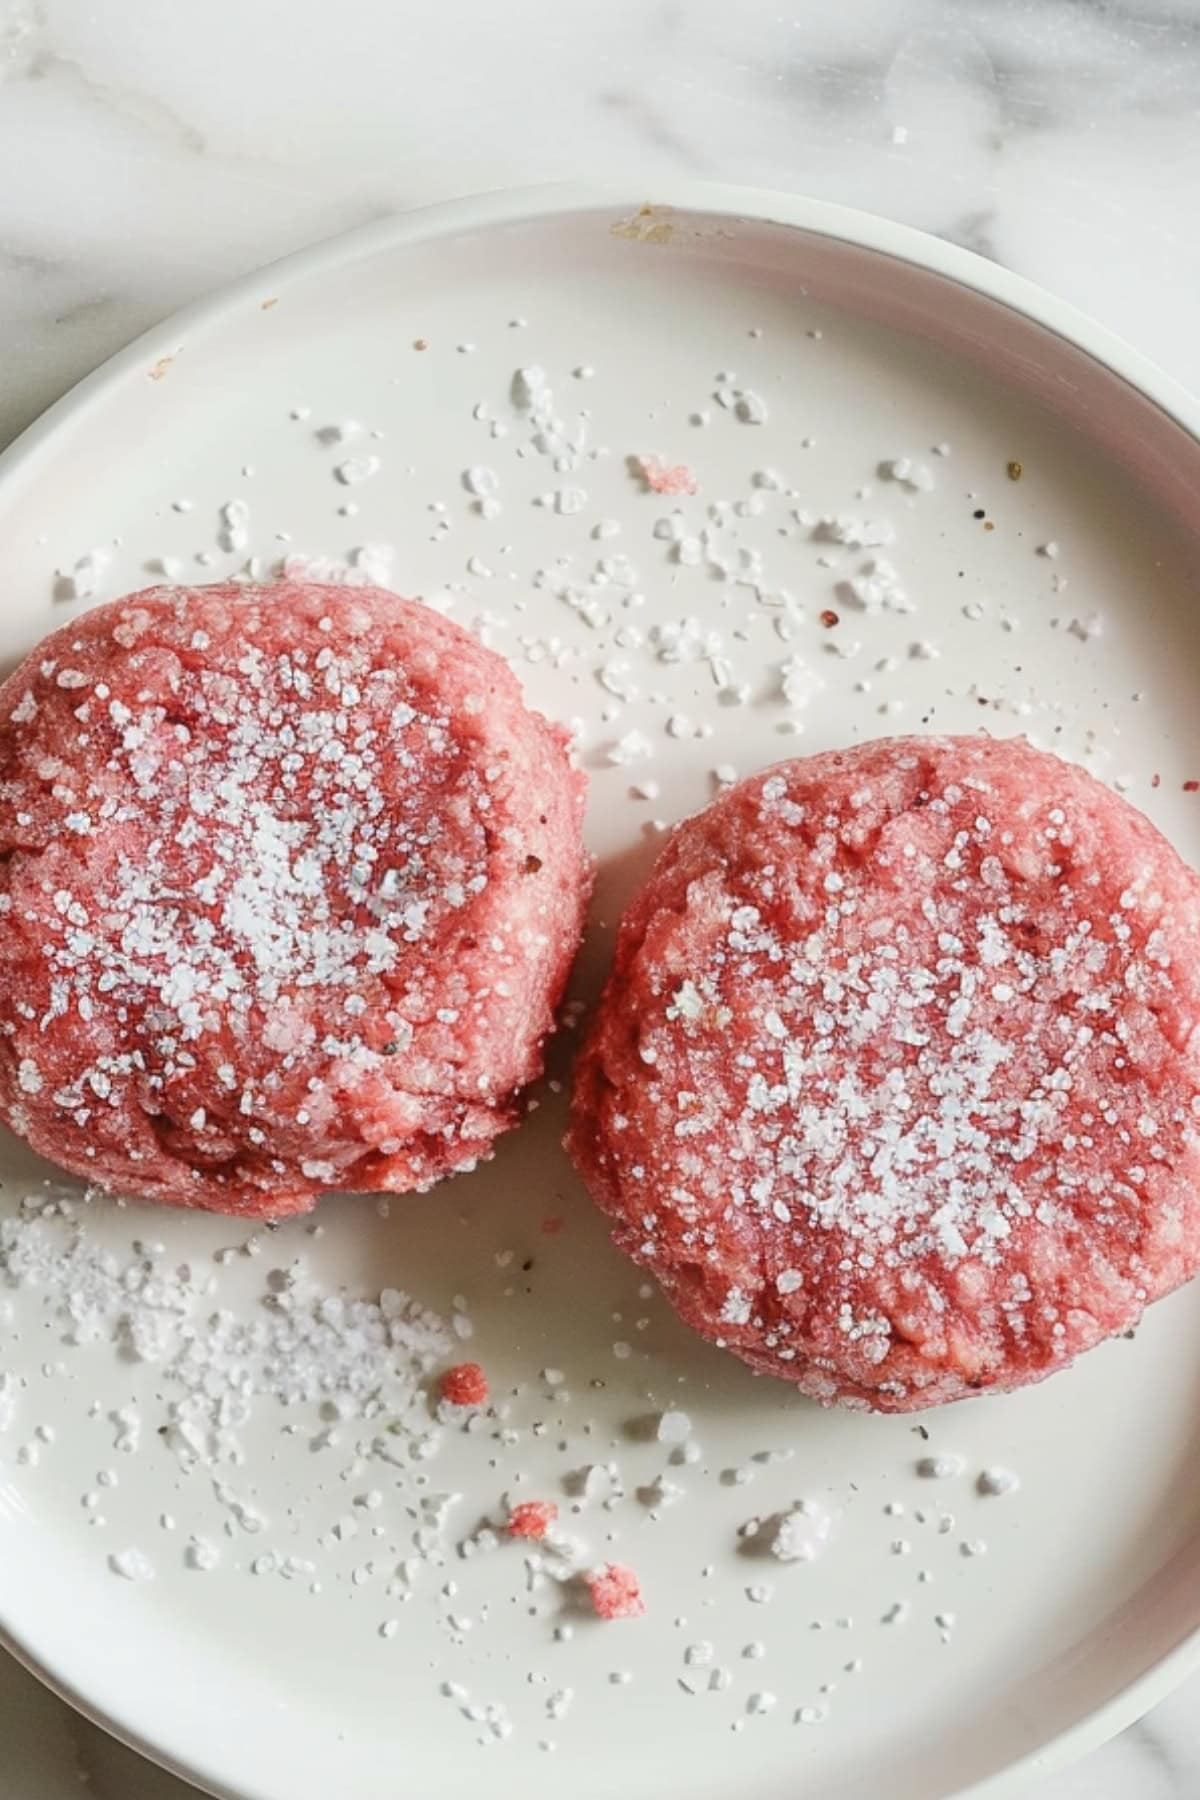 Pressed raw patties sprinkled with salt on a white plate.